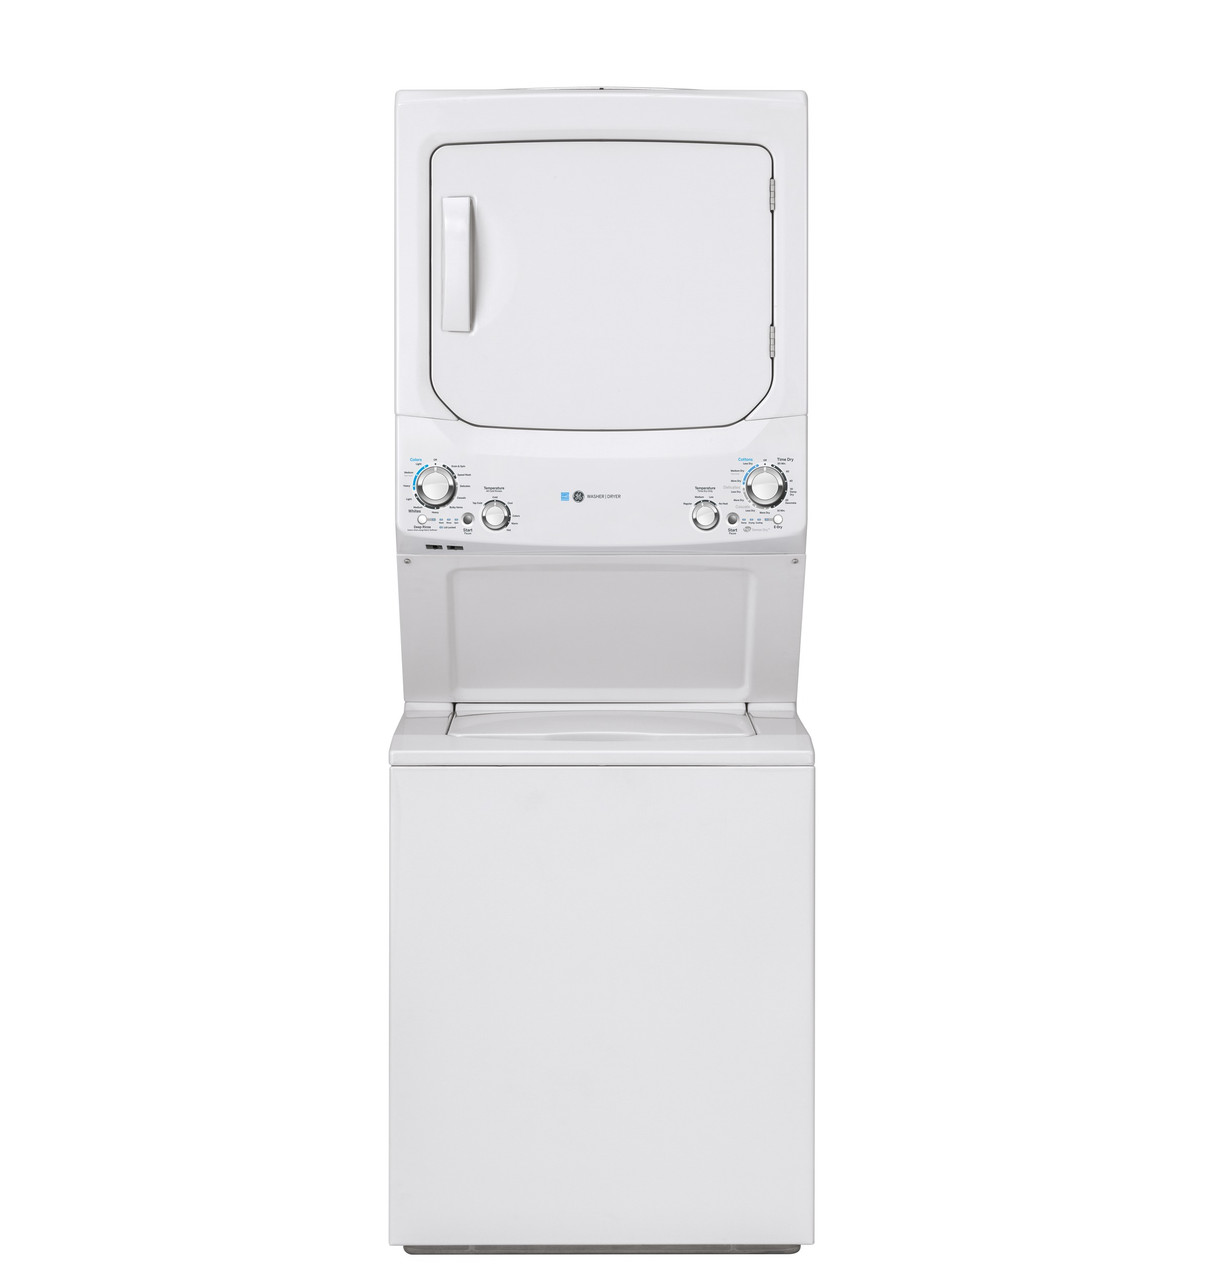 How To Fix The Error Code E61 For GE Dryer